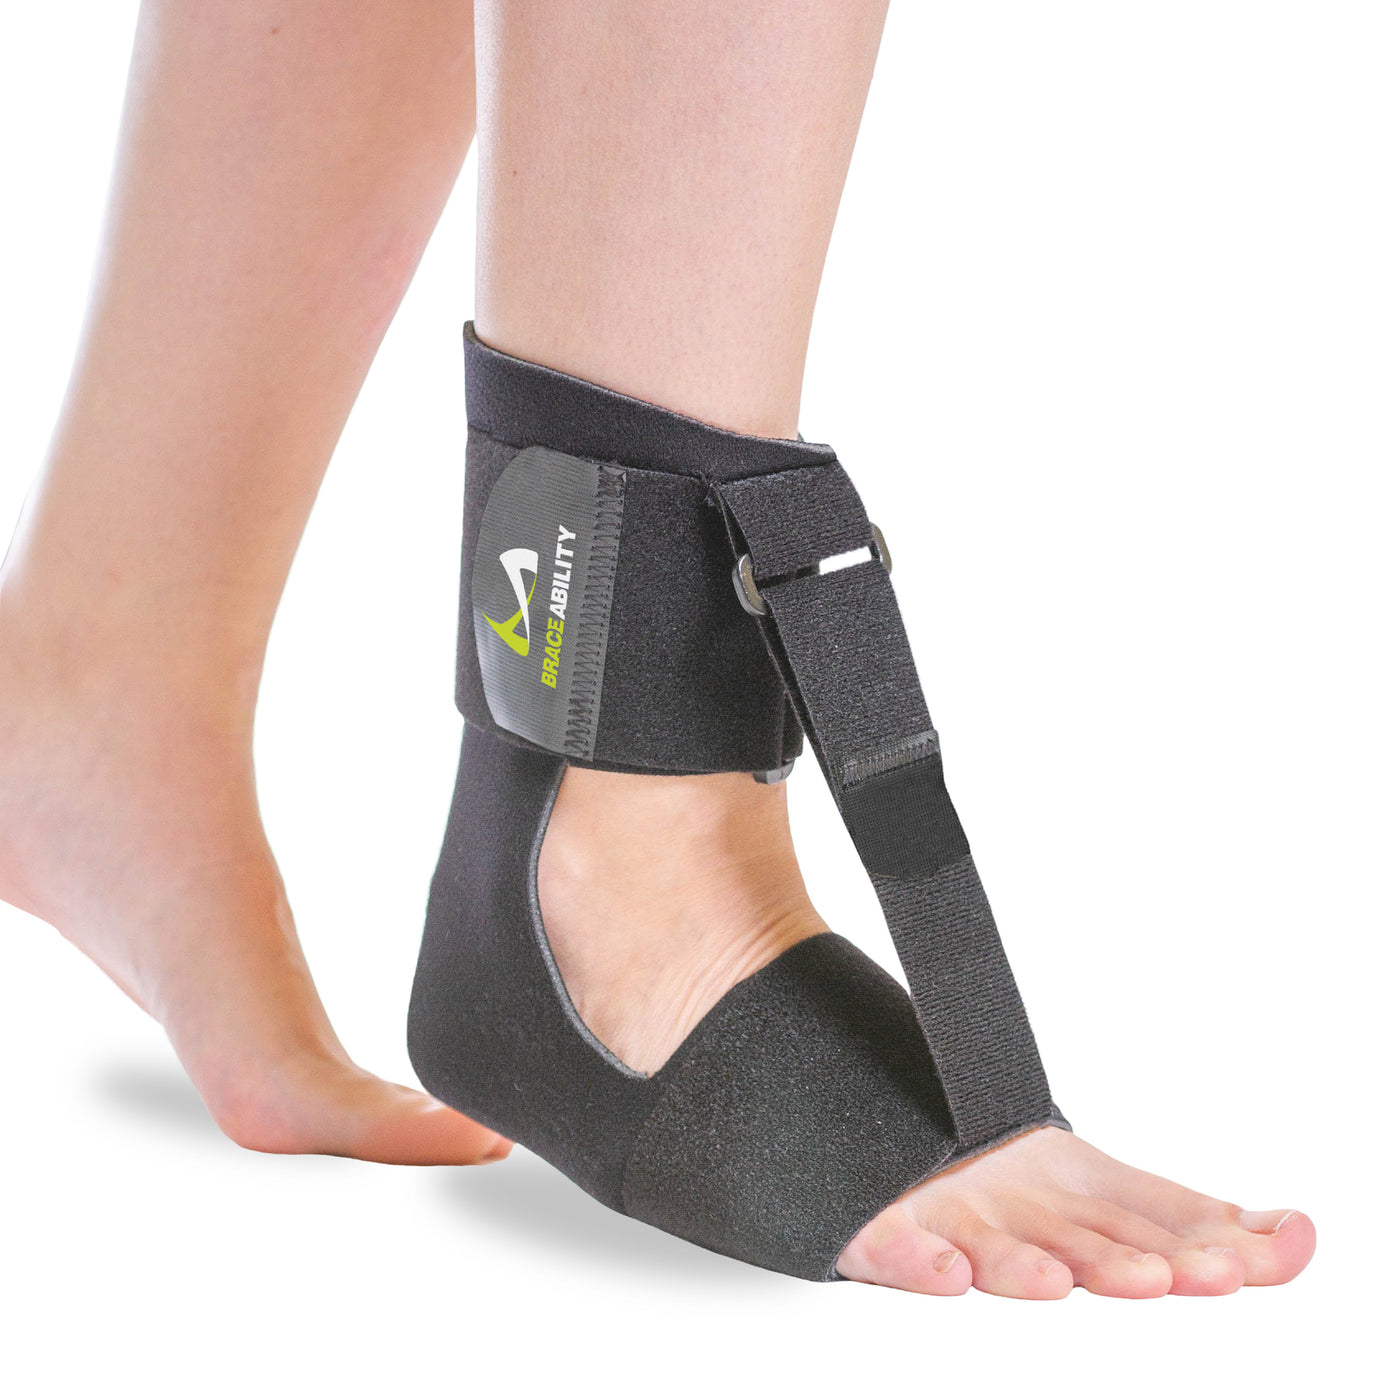 AFO Foot Drop Brace Medical Ankle Foot Orthosis Support Drop Foot Postural  Correction Brace (Small, LEFT)